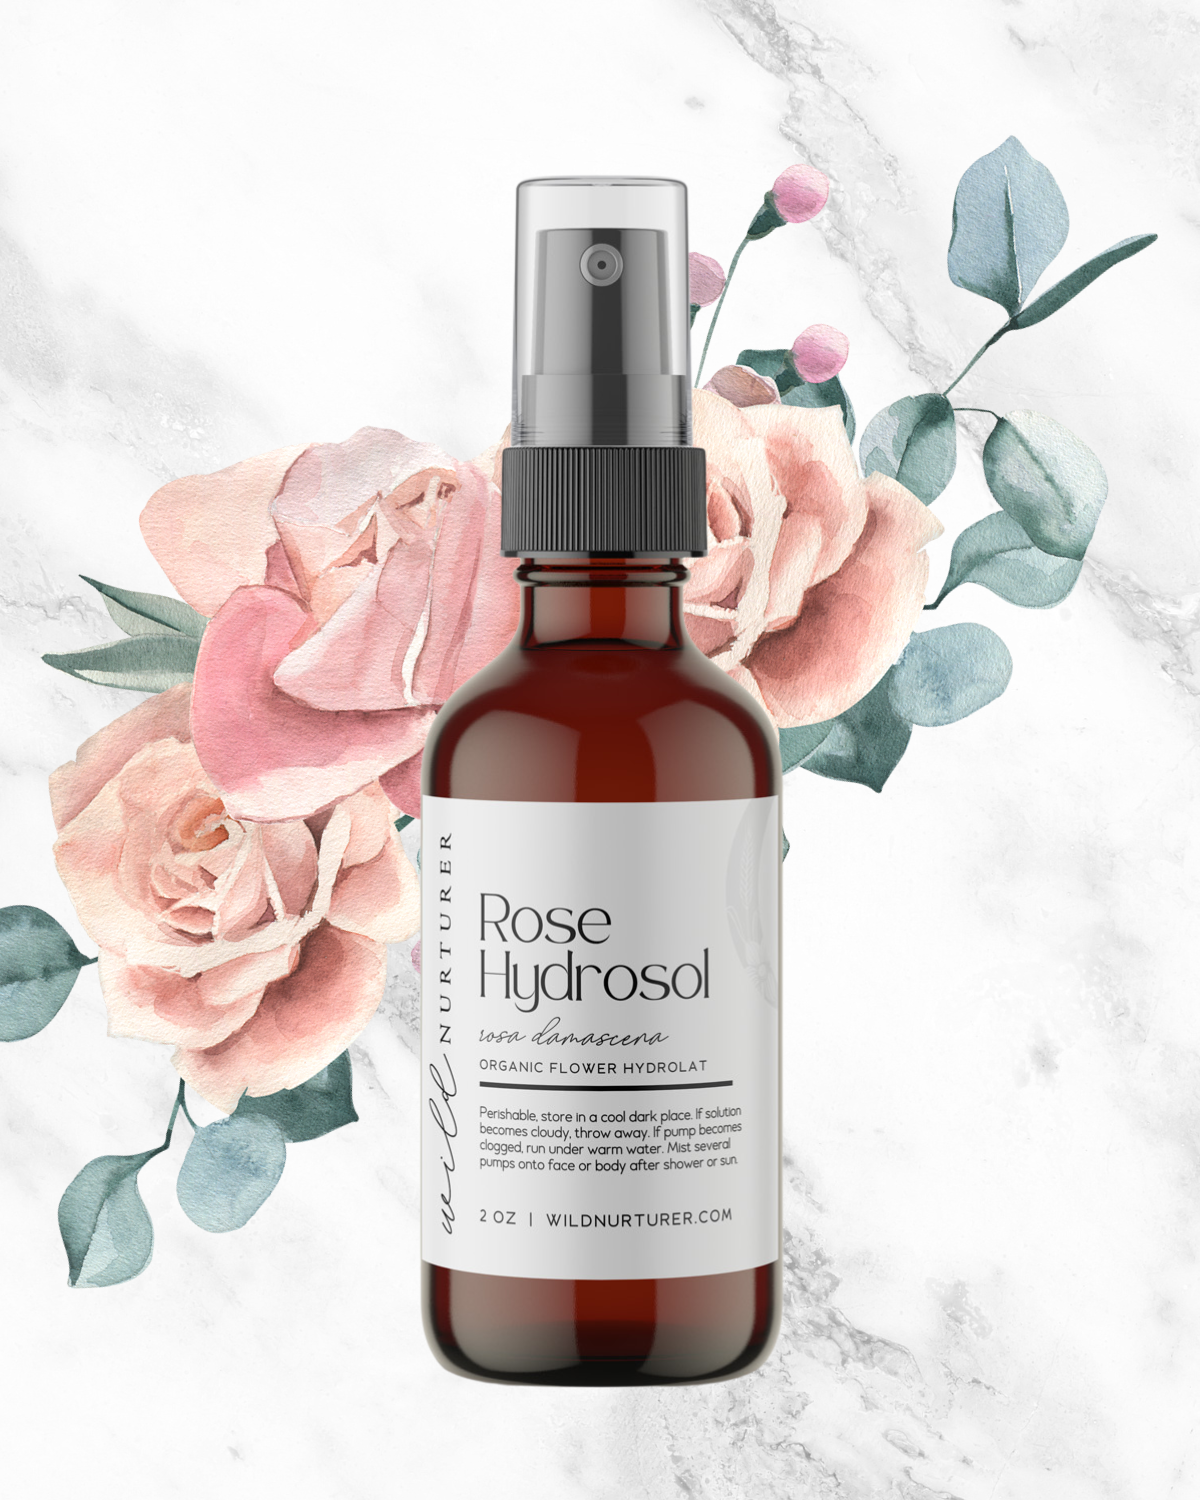 A bottle of Rose Hydrosol spray set against a backdrop of illustrated pink roses and green leaves on a marble surface.